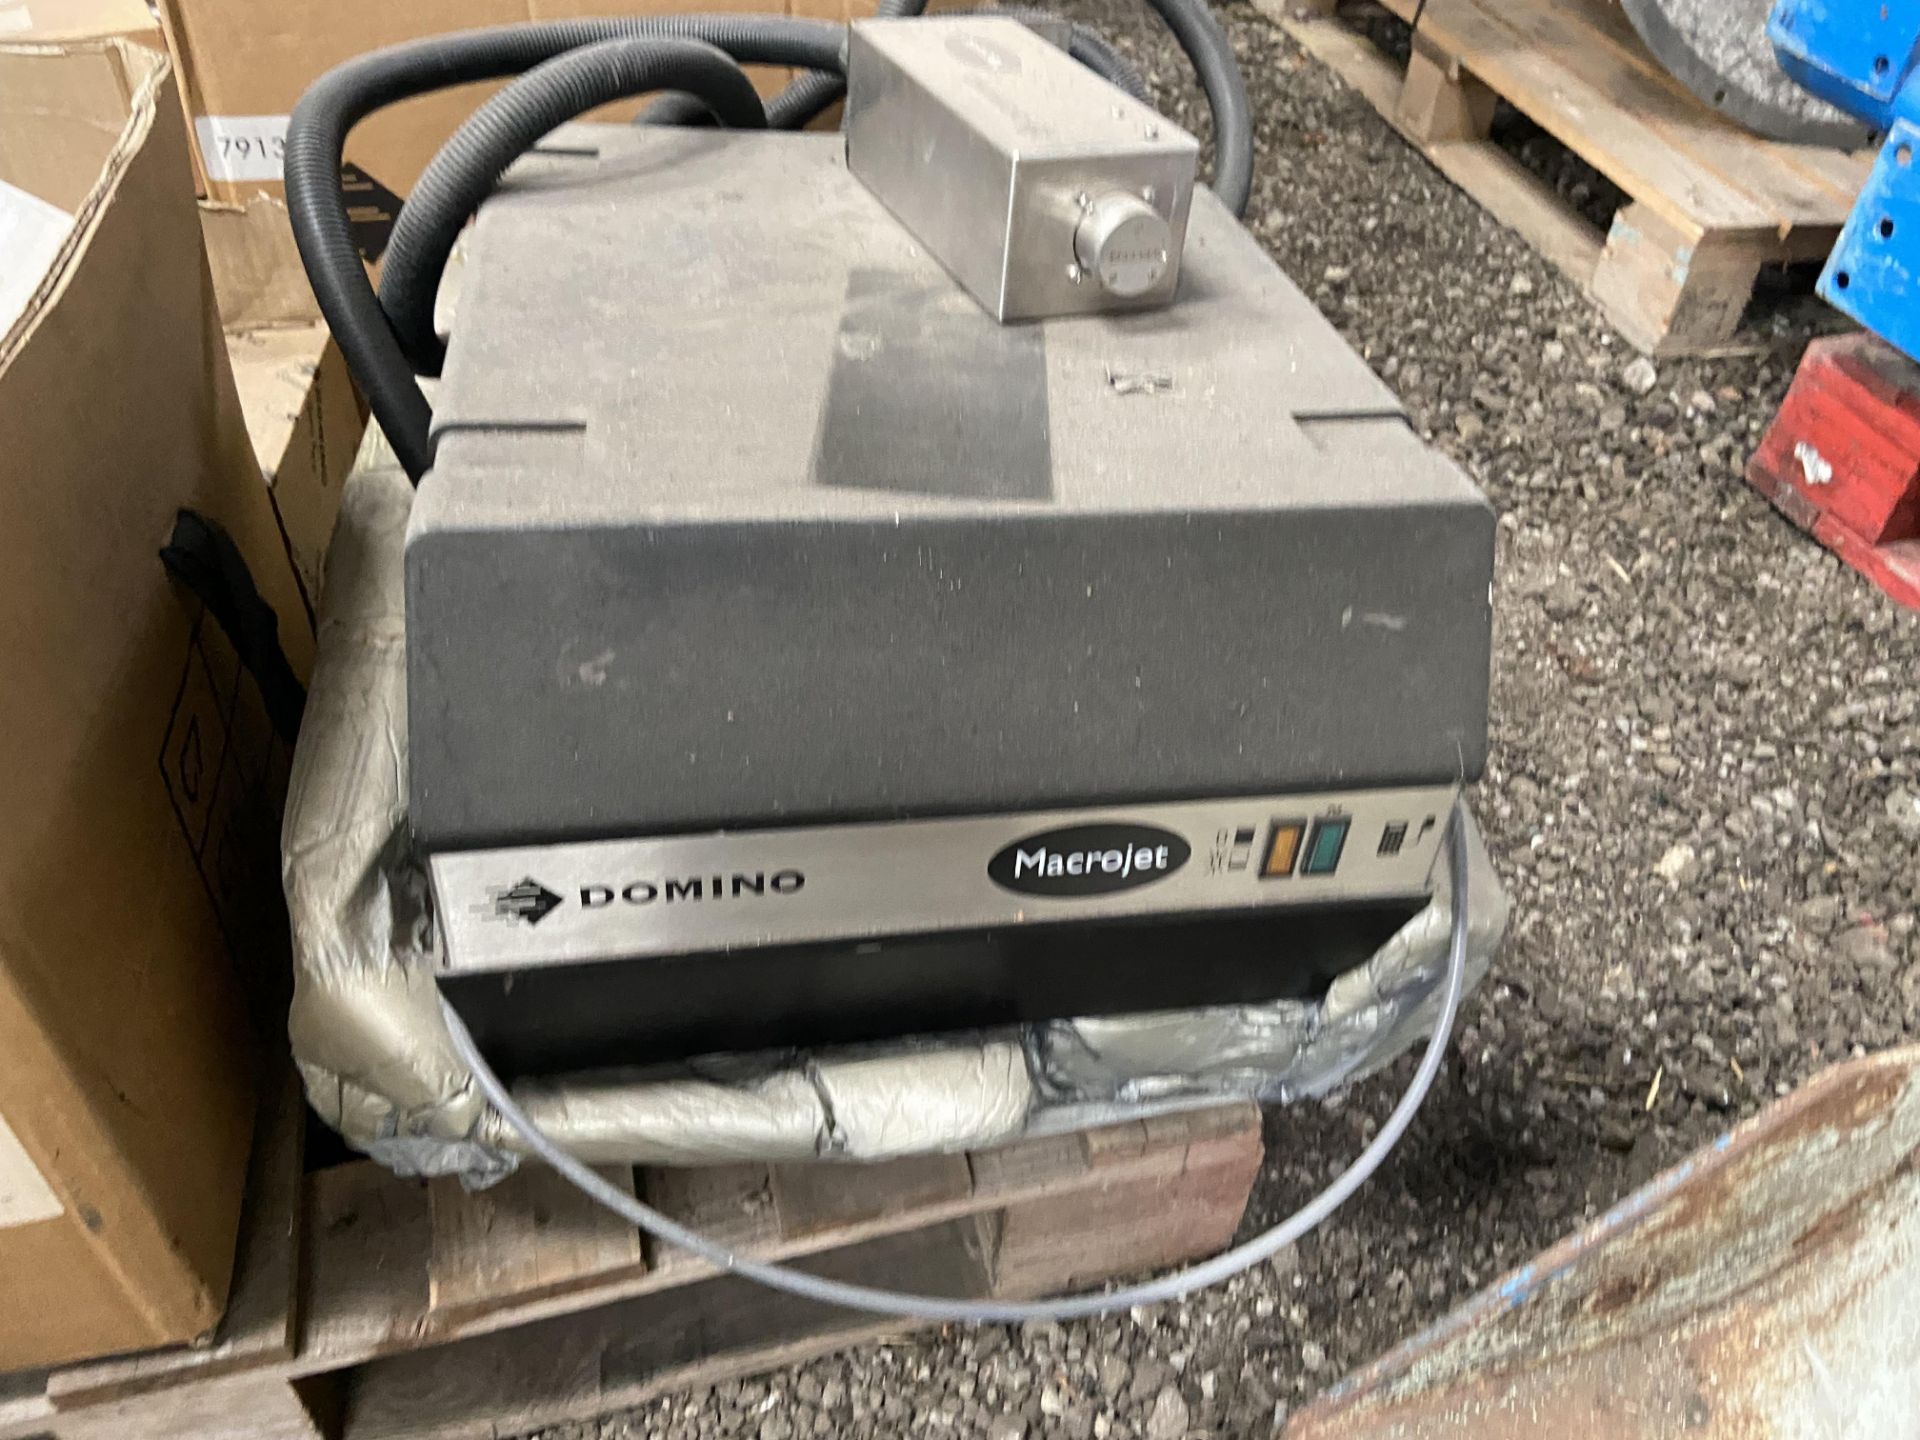 Domino Macrojet Code Printer, with equipment on pallet; lot located Holme upon Spalding Moor, - Bild 2 aus 2